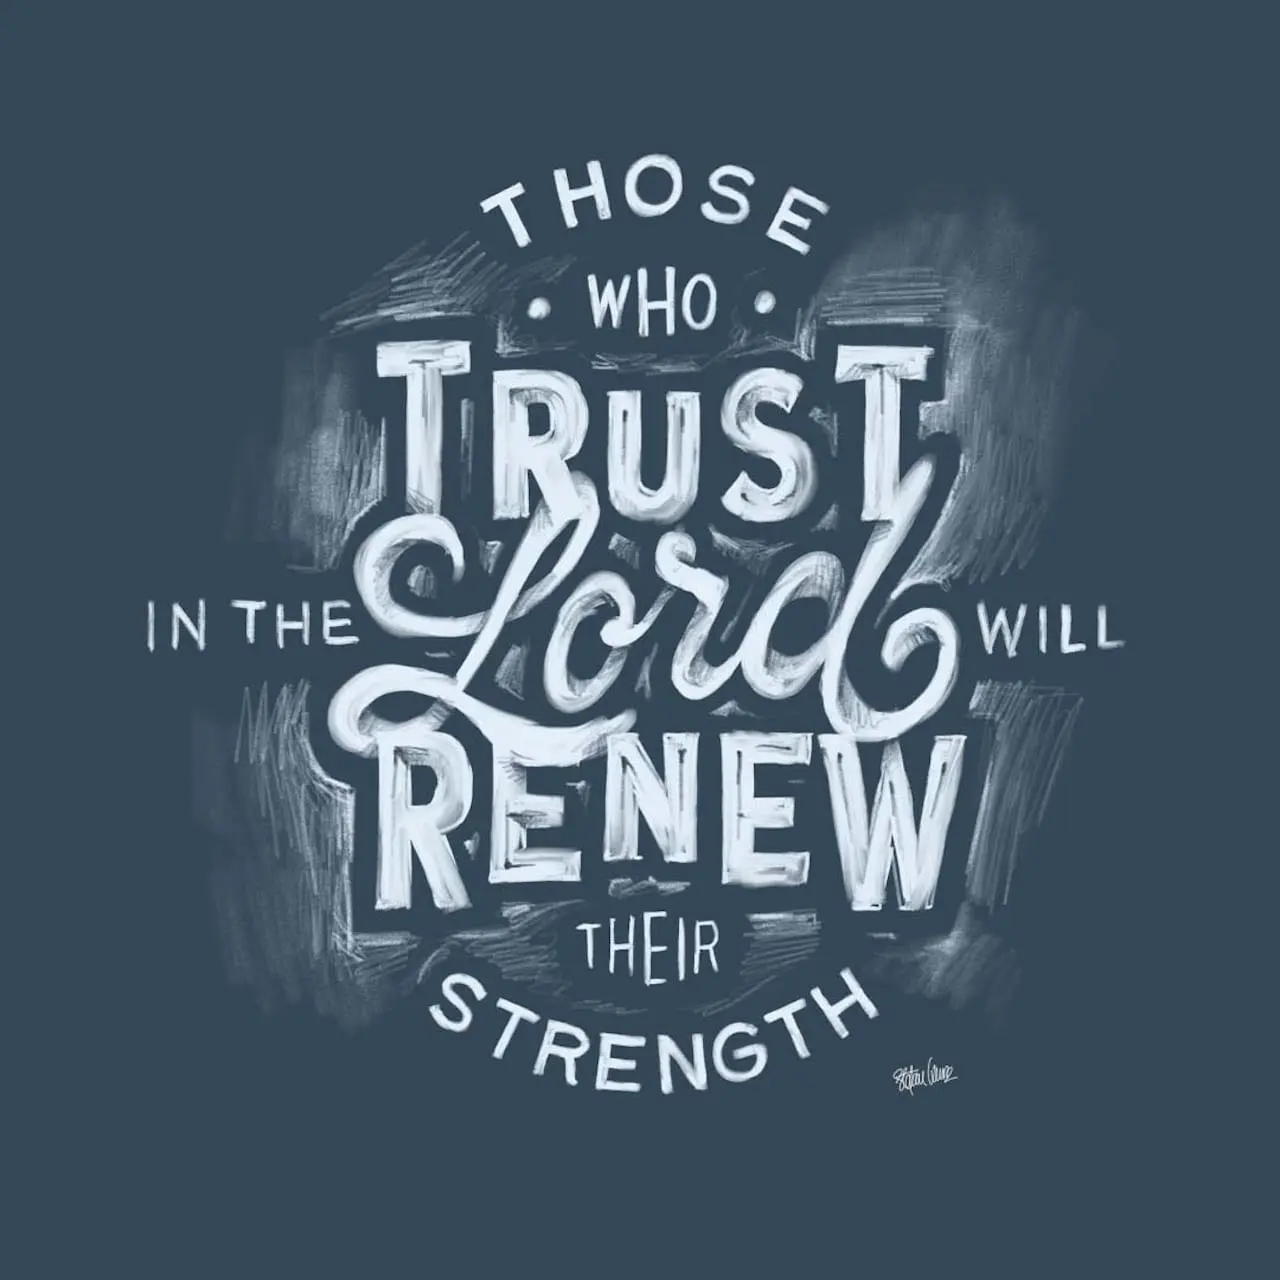 Those who trust in the Lord wil renew their strength